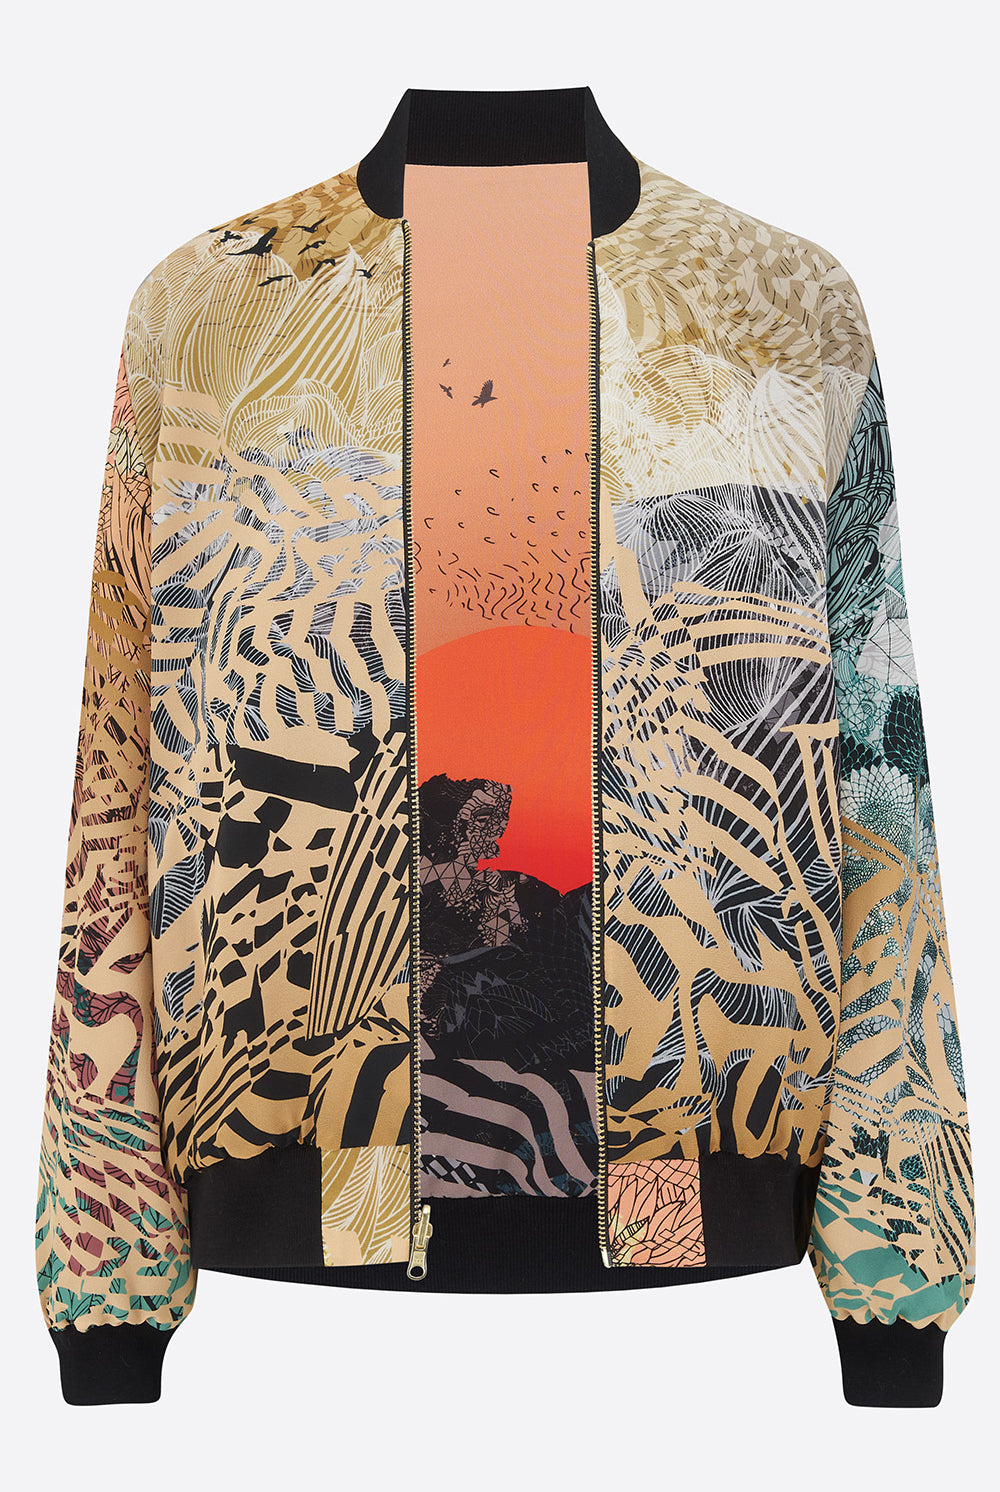 An open reversible silk bomber jacket with an orange sunrise on one side and yellow patter on other